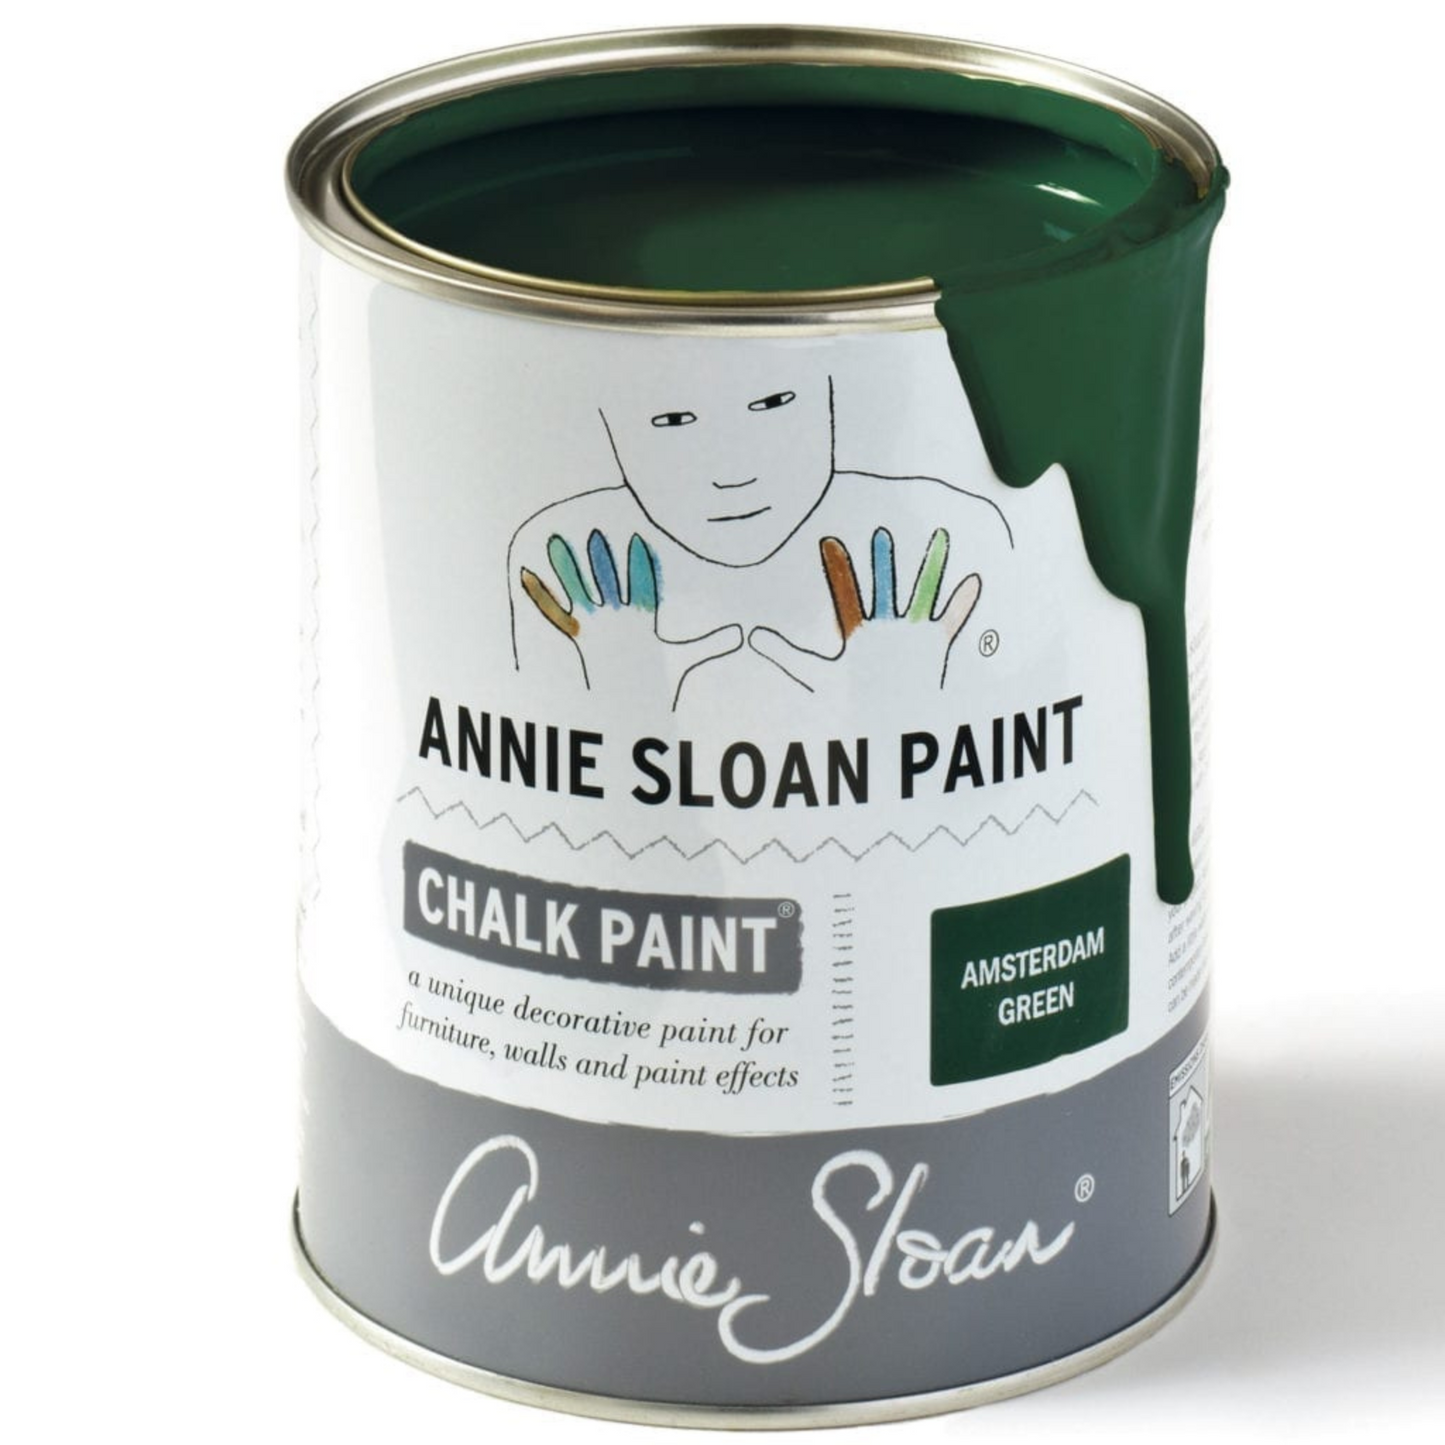 Can of chalk paint in Amsterdam Green color.